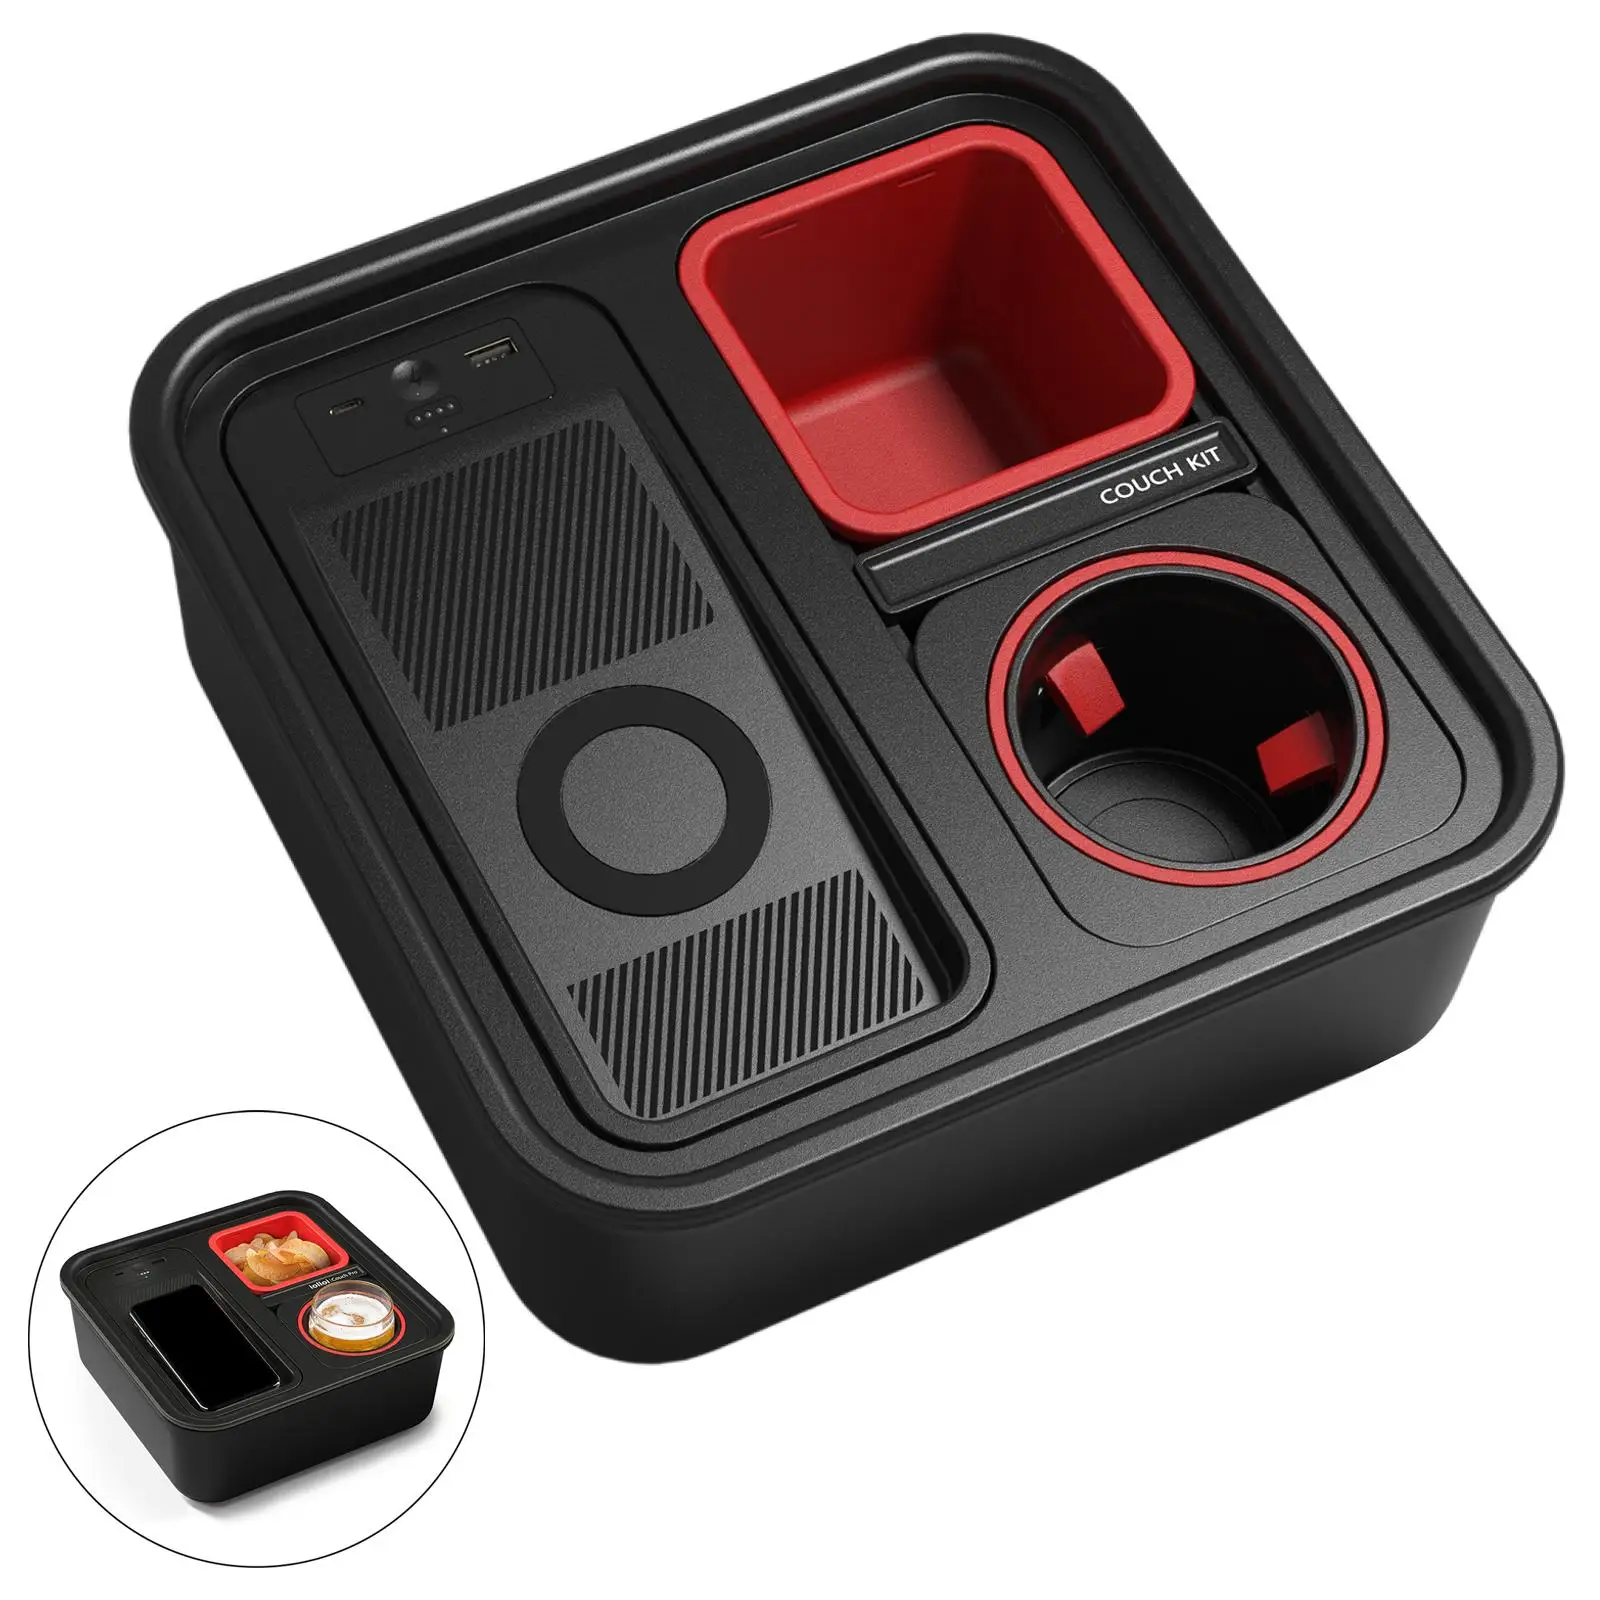 Cup Holder Self Balancing Portable Storage Wireless Attachable Creative Base for Bed Remote Control Outdoor Video Gaming Table